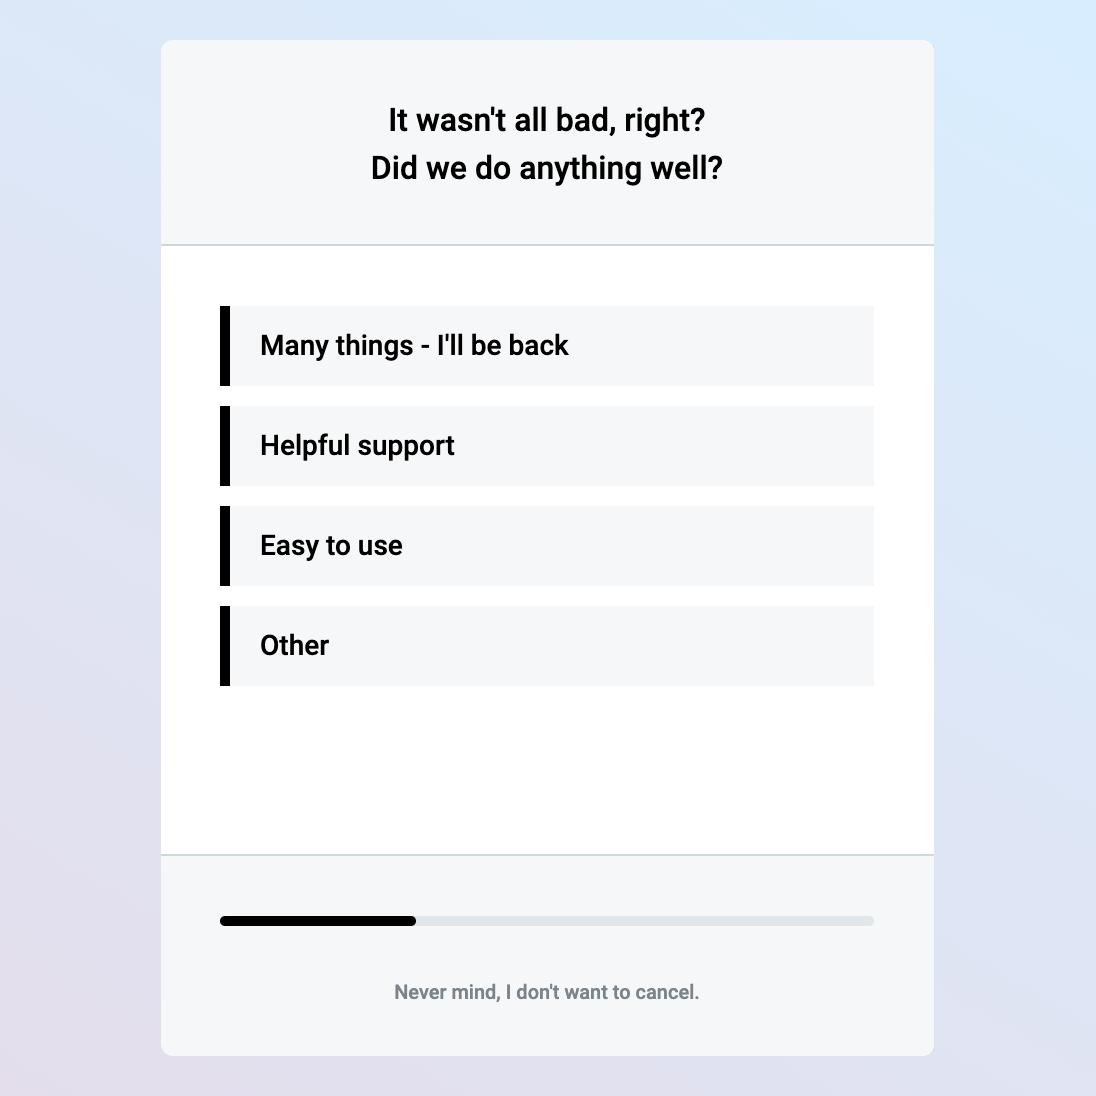 Retain Cancellation Flow modal step 2. It says: It wasn't all bad, right? Did we do anything well? The options are: many things - I'll be back, helpful support, easy to use, other.